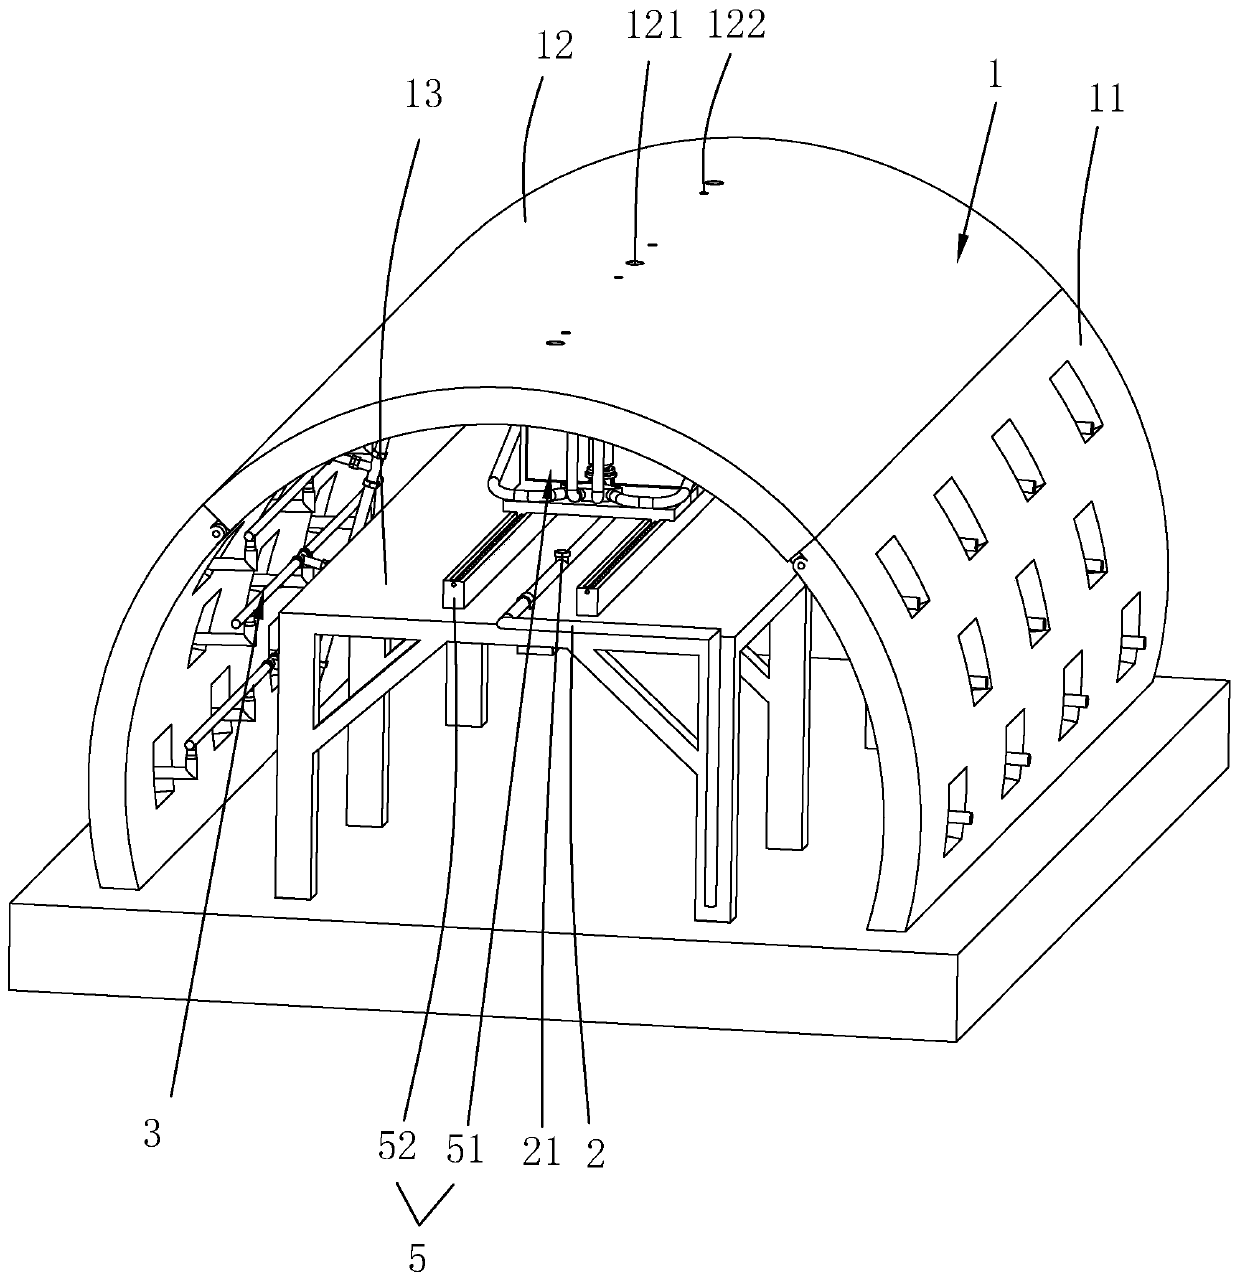 Lining trolley and tunnel secondary lining construction method using lining trolley